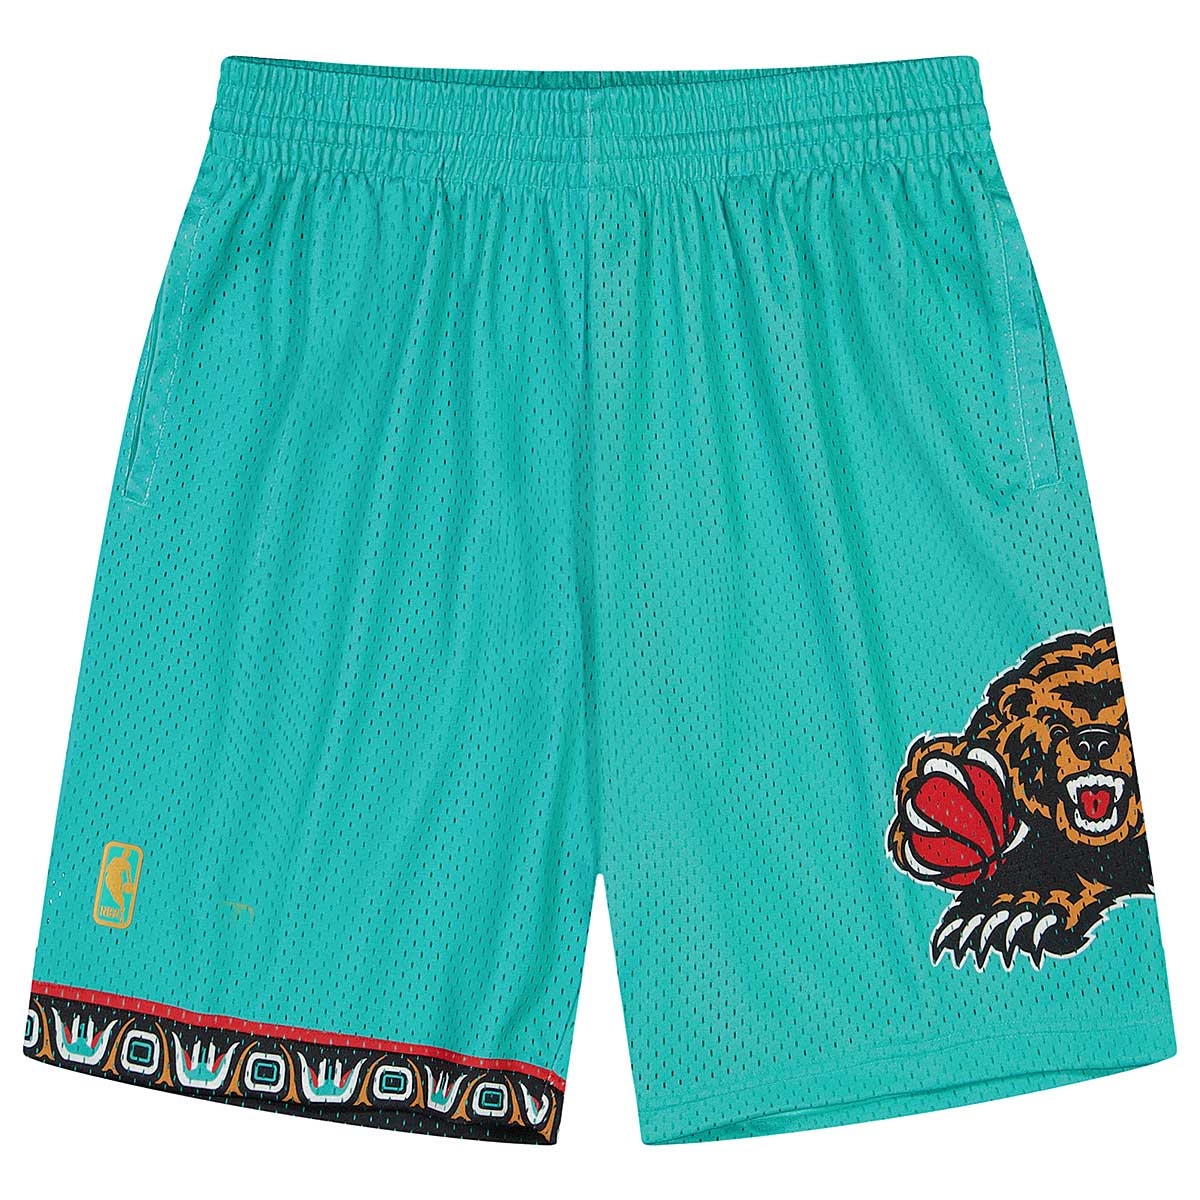 Mitchell And Ness Nba Vancouver Grizzlies Swingman Shorts, Teal